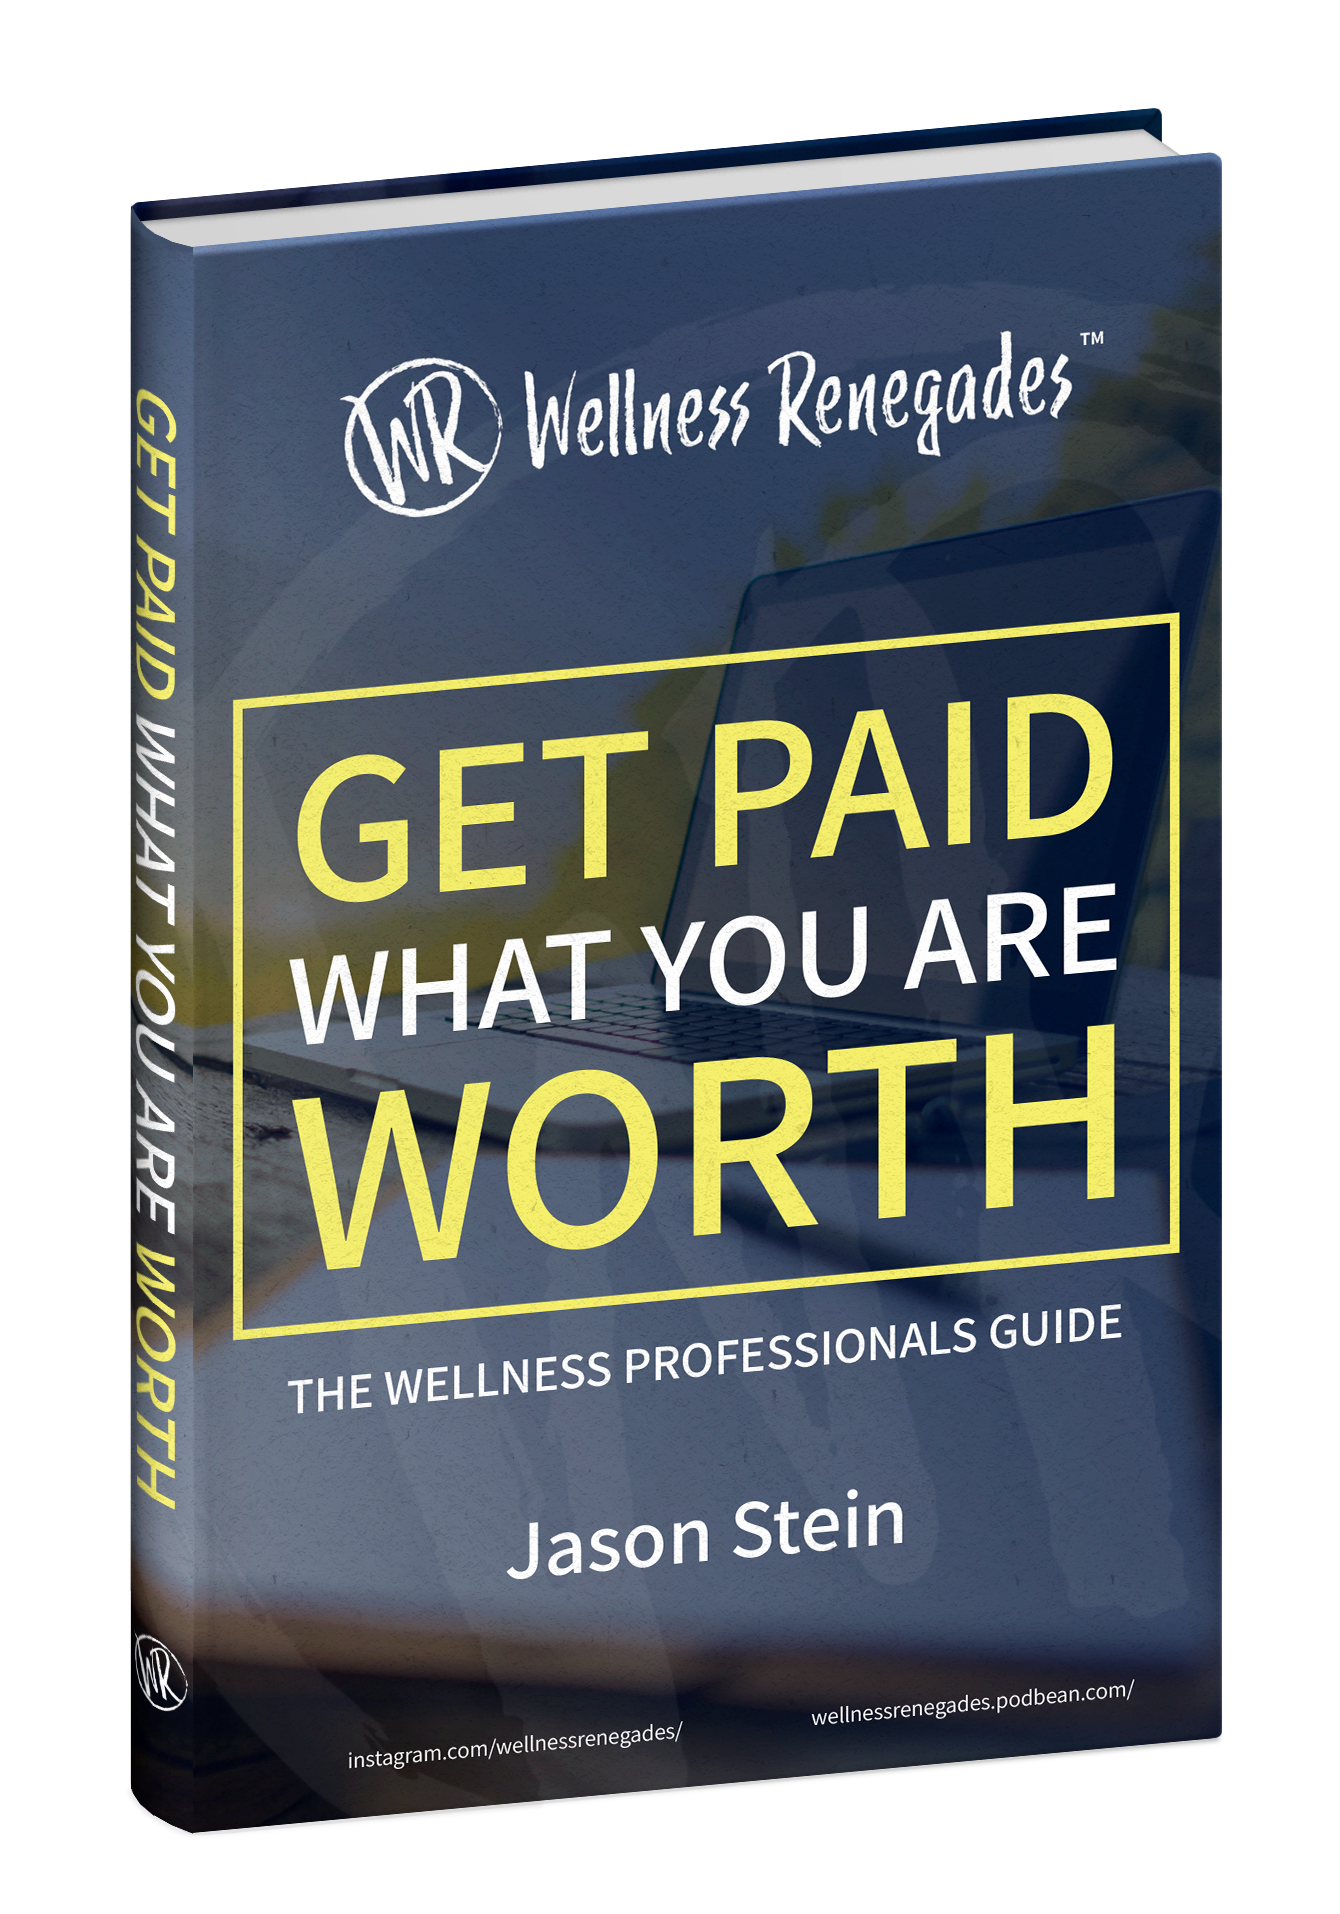 Get Paid What You Are Worth by Jason Stein, Wellness Renegades